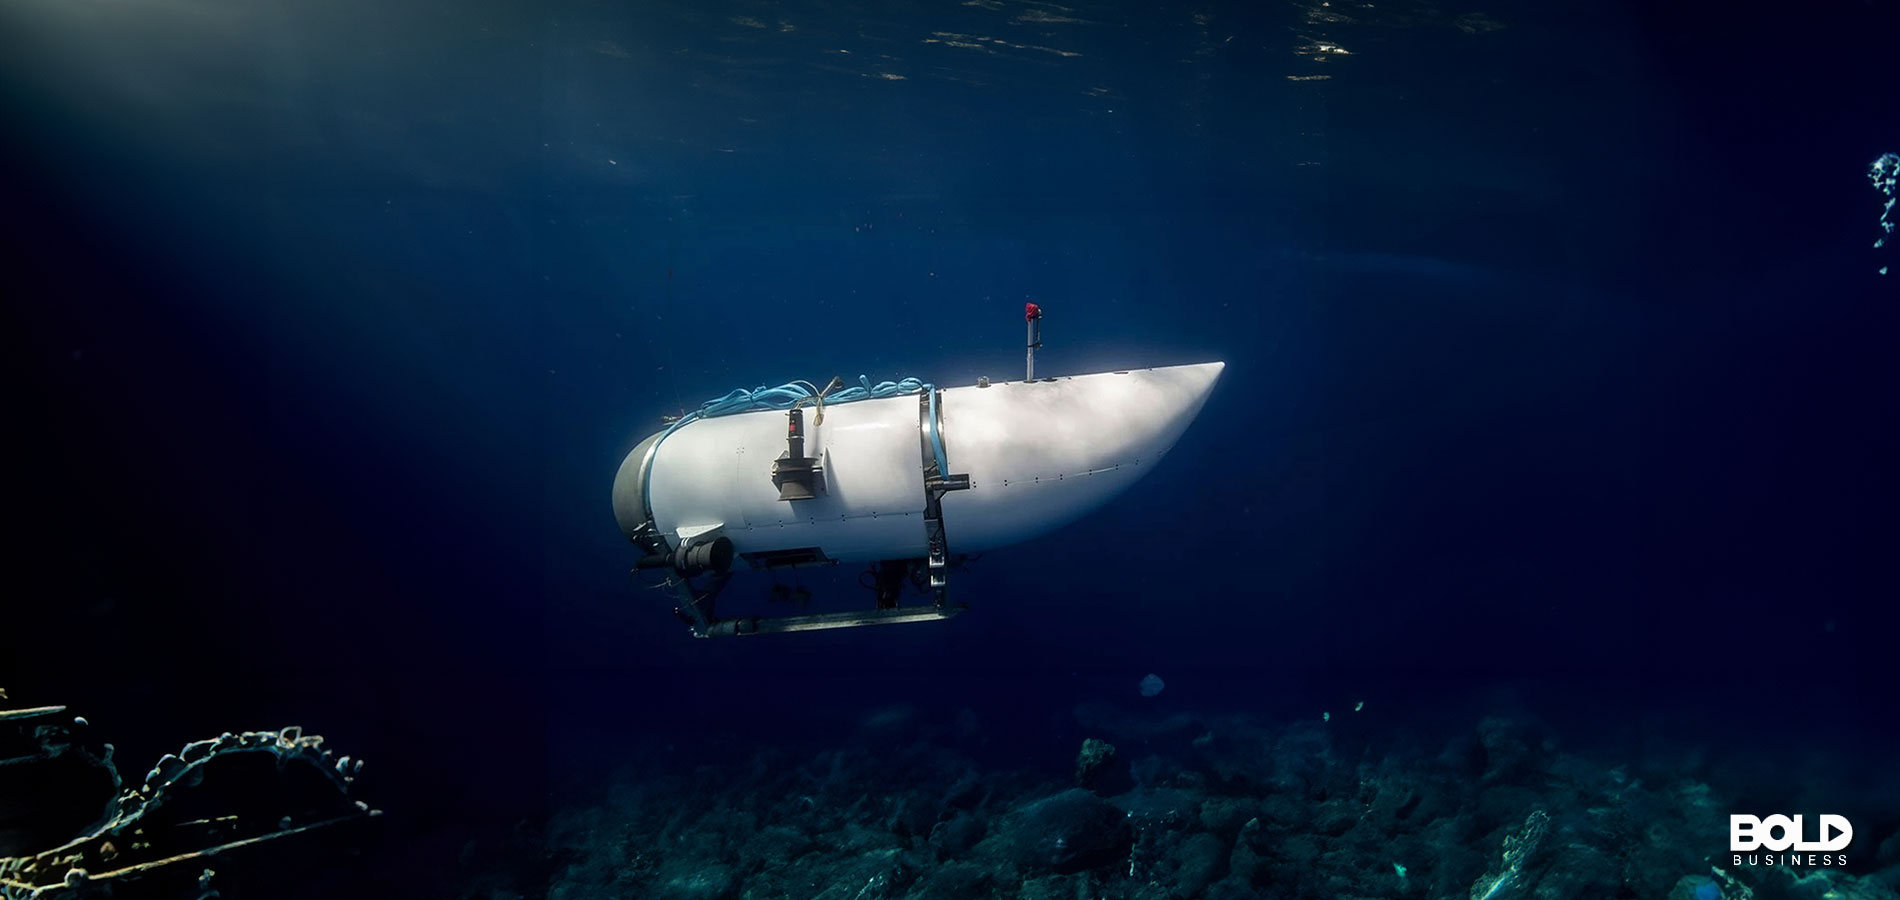 A submersible about to explode from adventure tourism risks